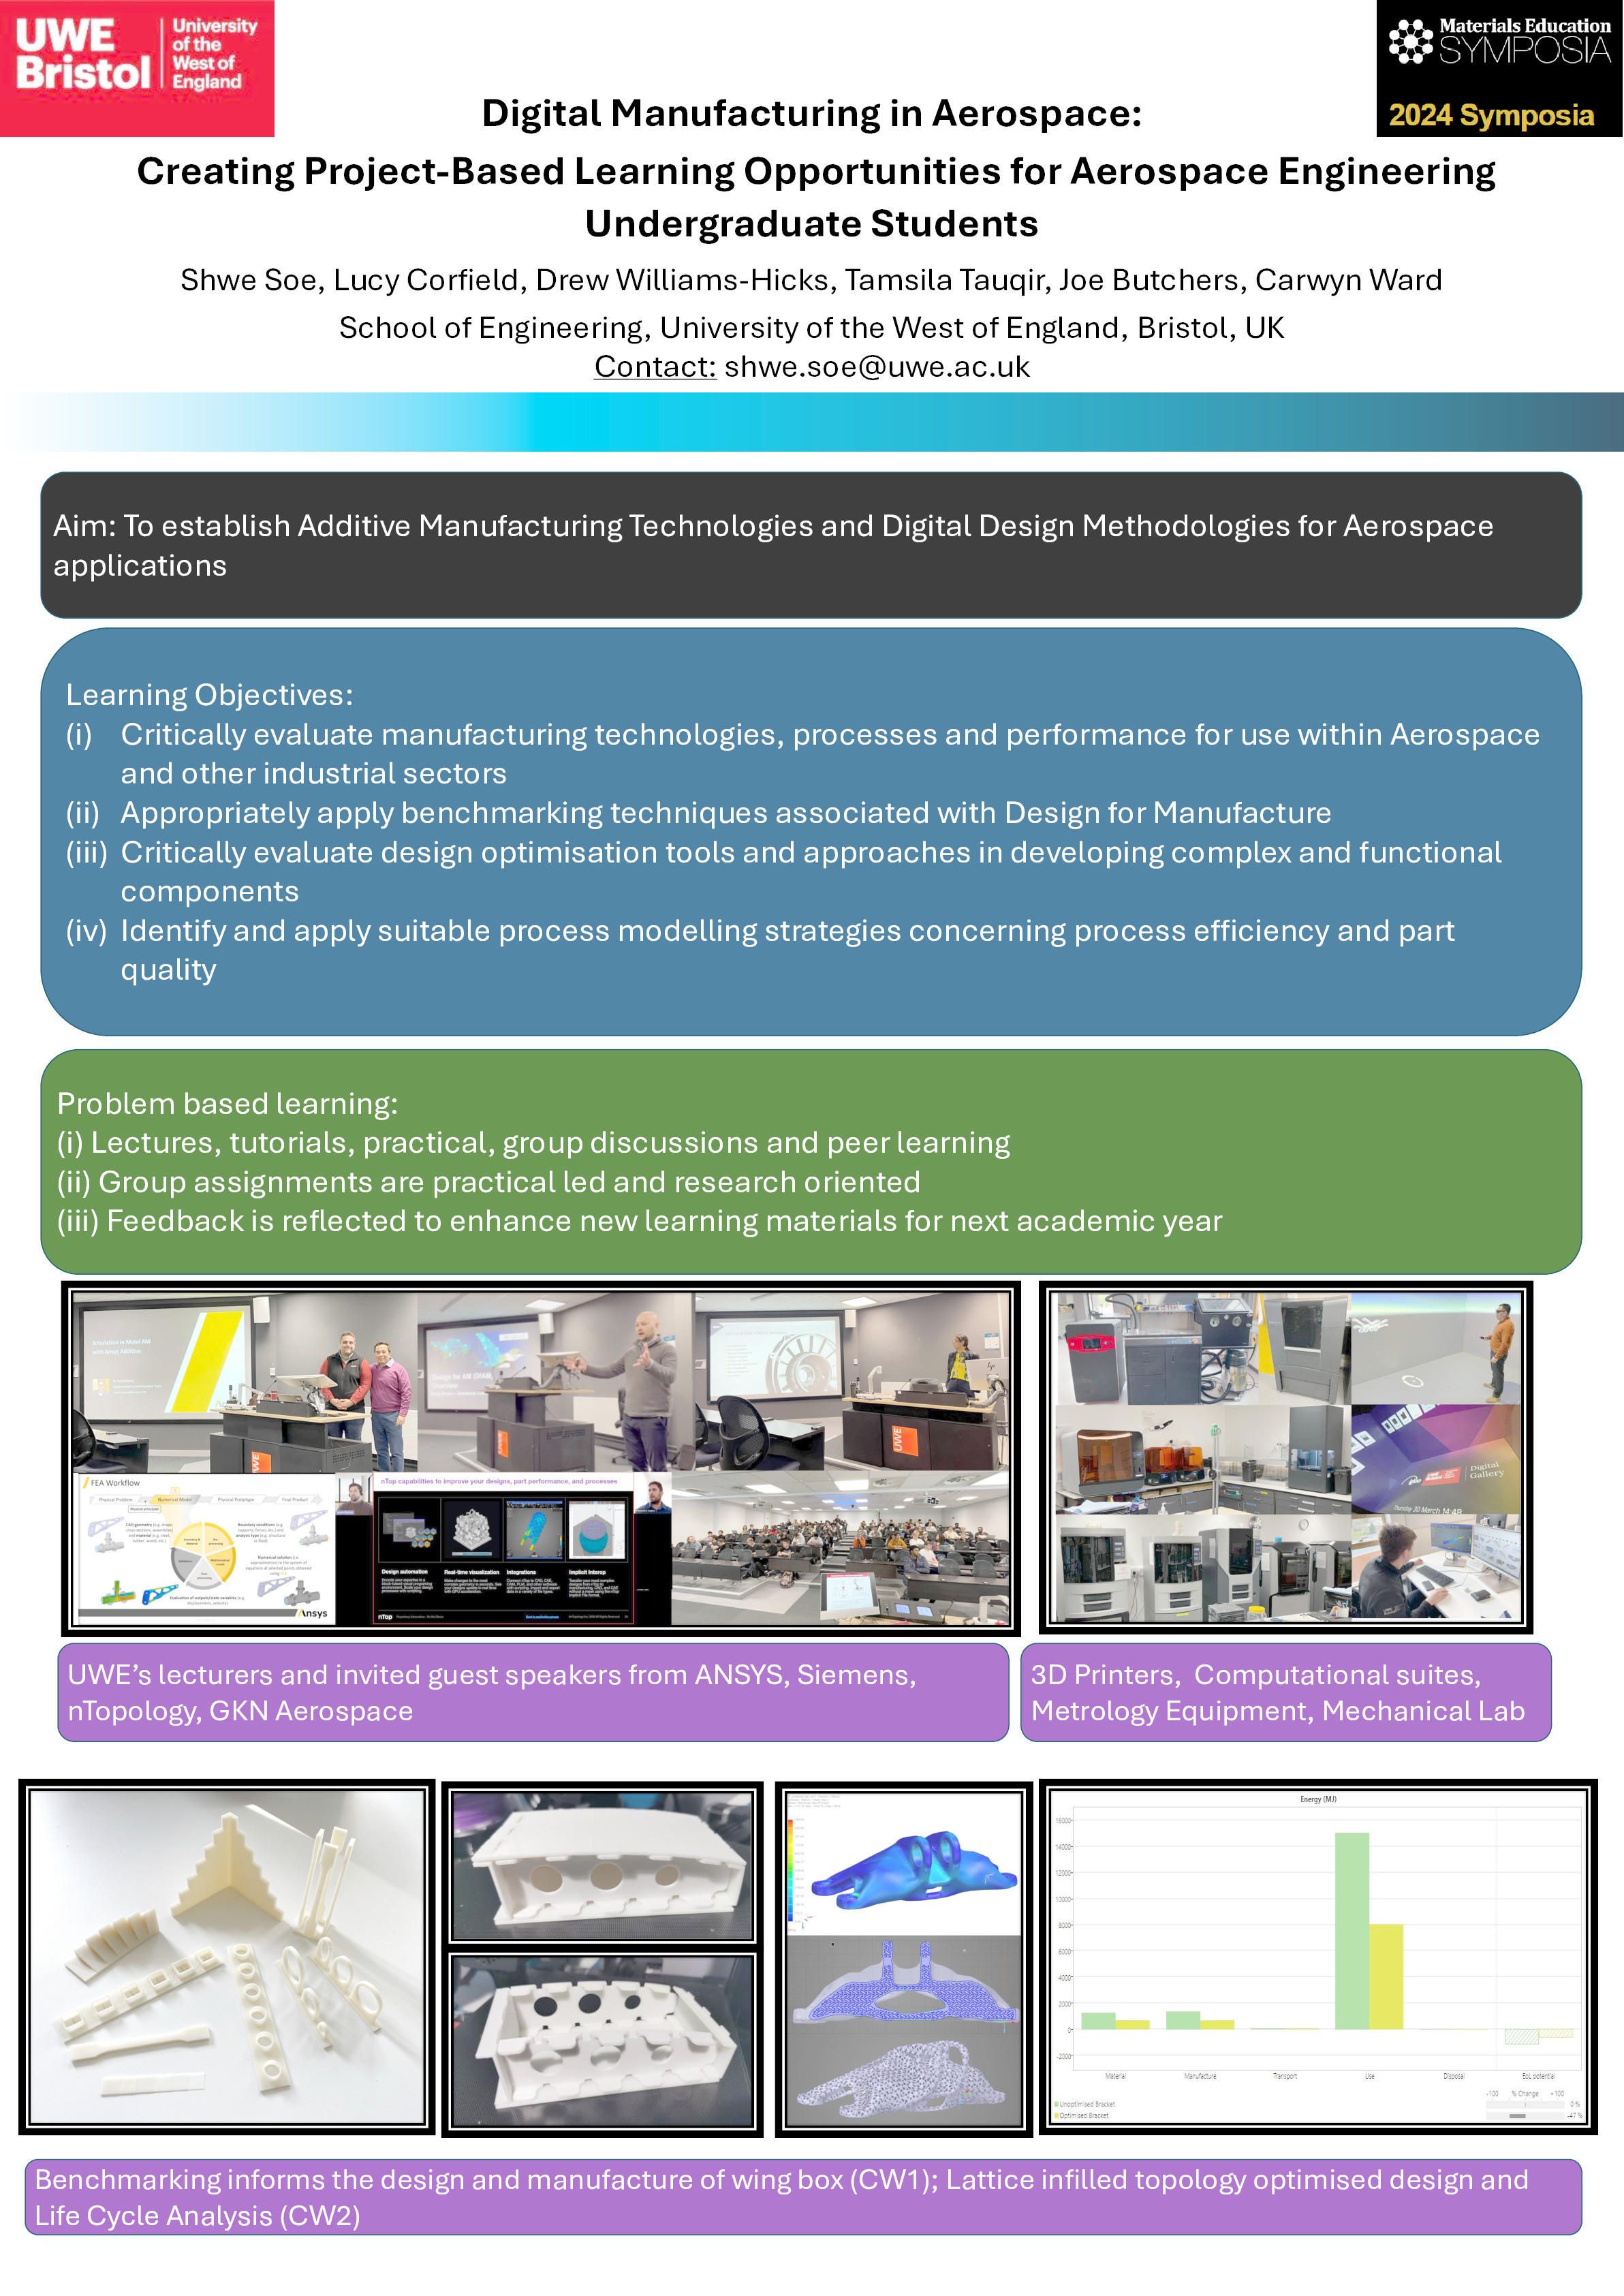 Digital manufacturing in aerospace:  Creating project-based learning opportunities for aerospace engineering undergraduate students Thumbnail